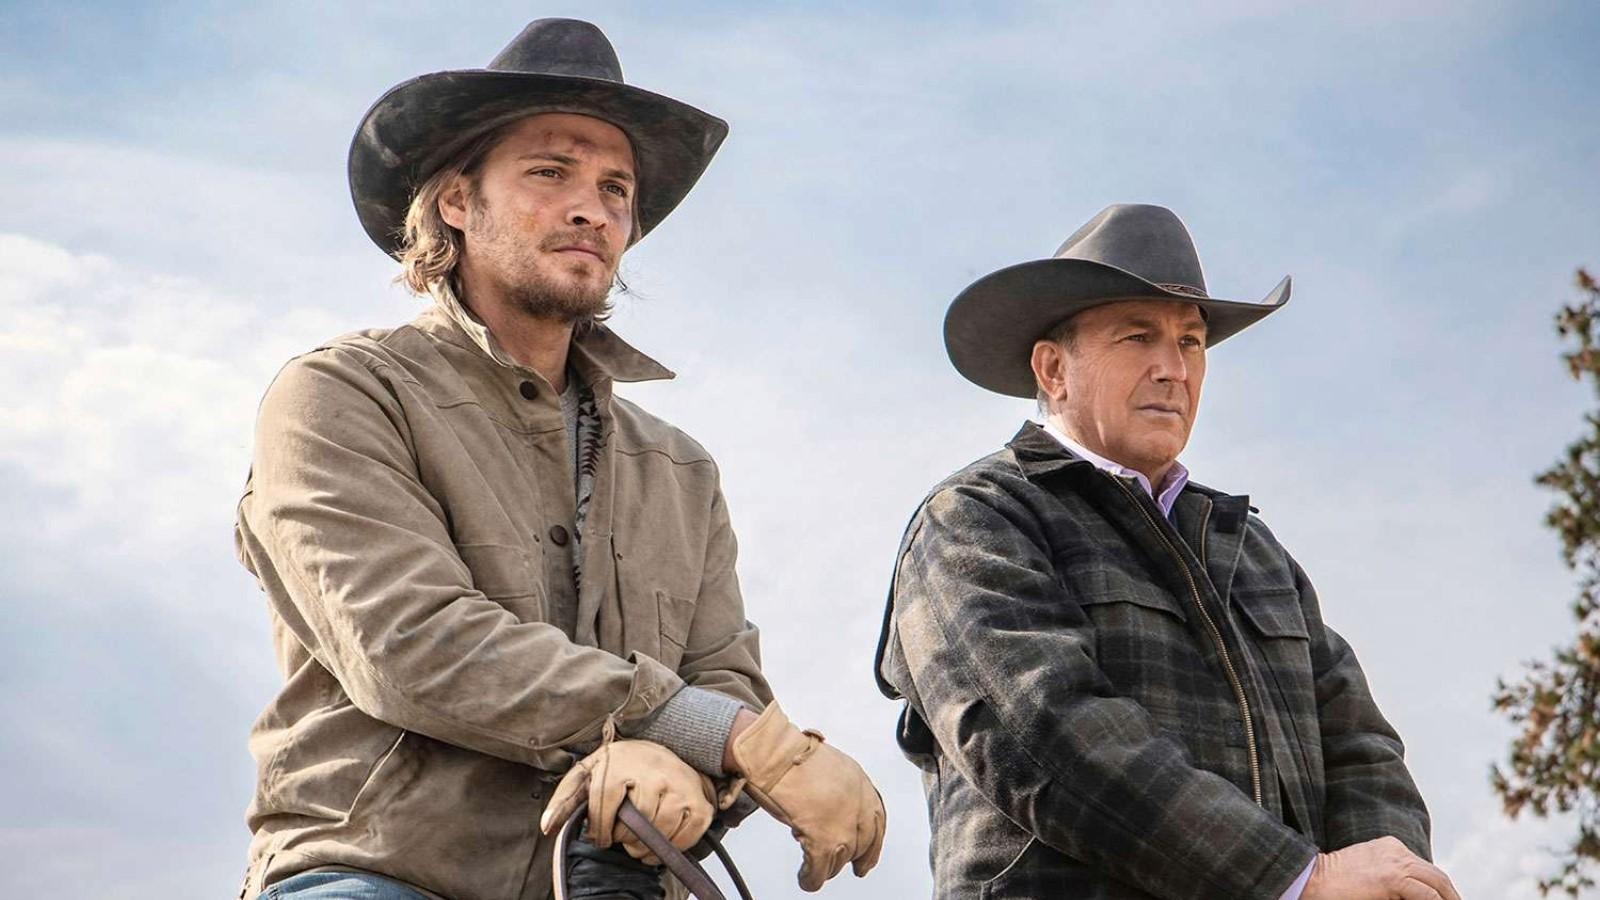 Luke Grimes and Kevin Costner as Kayce and John Dutton in Yellowstone, sitting on horses